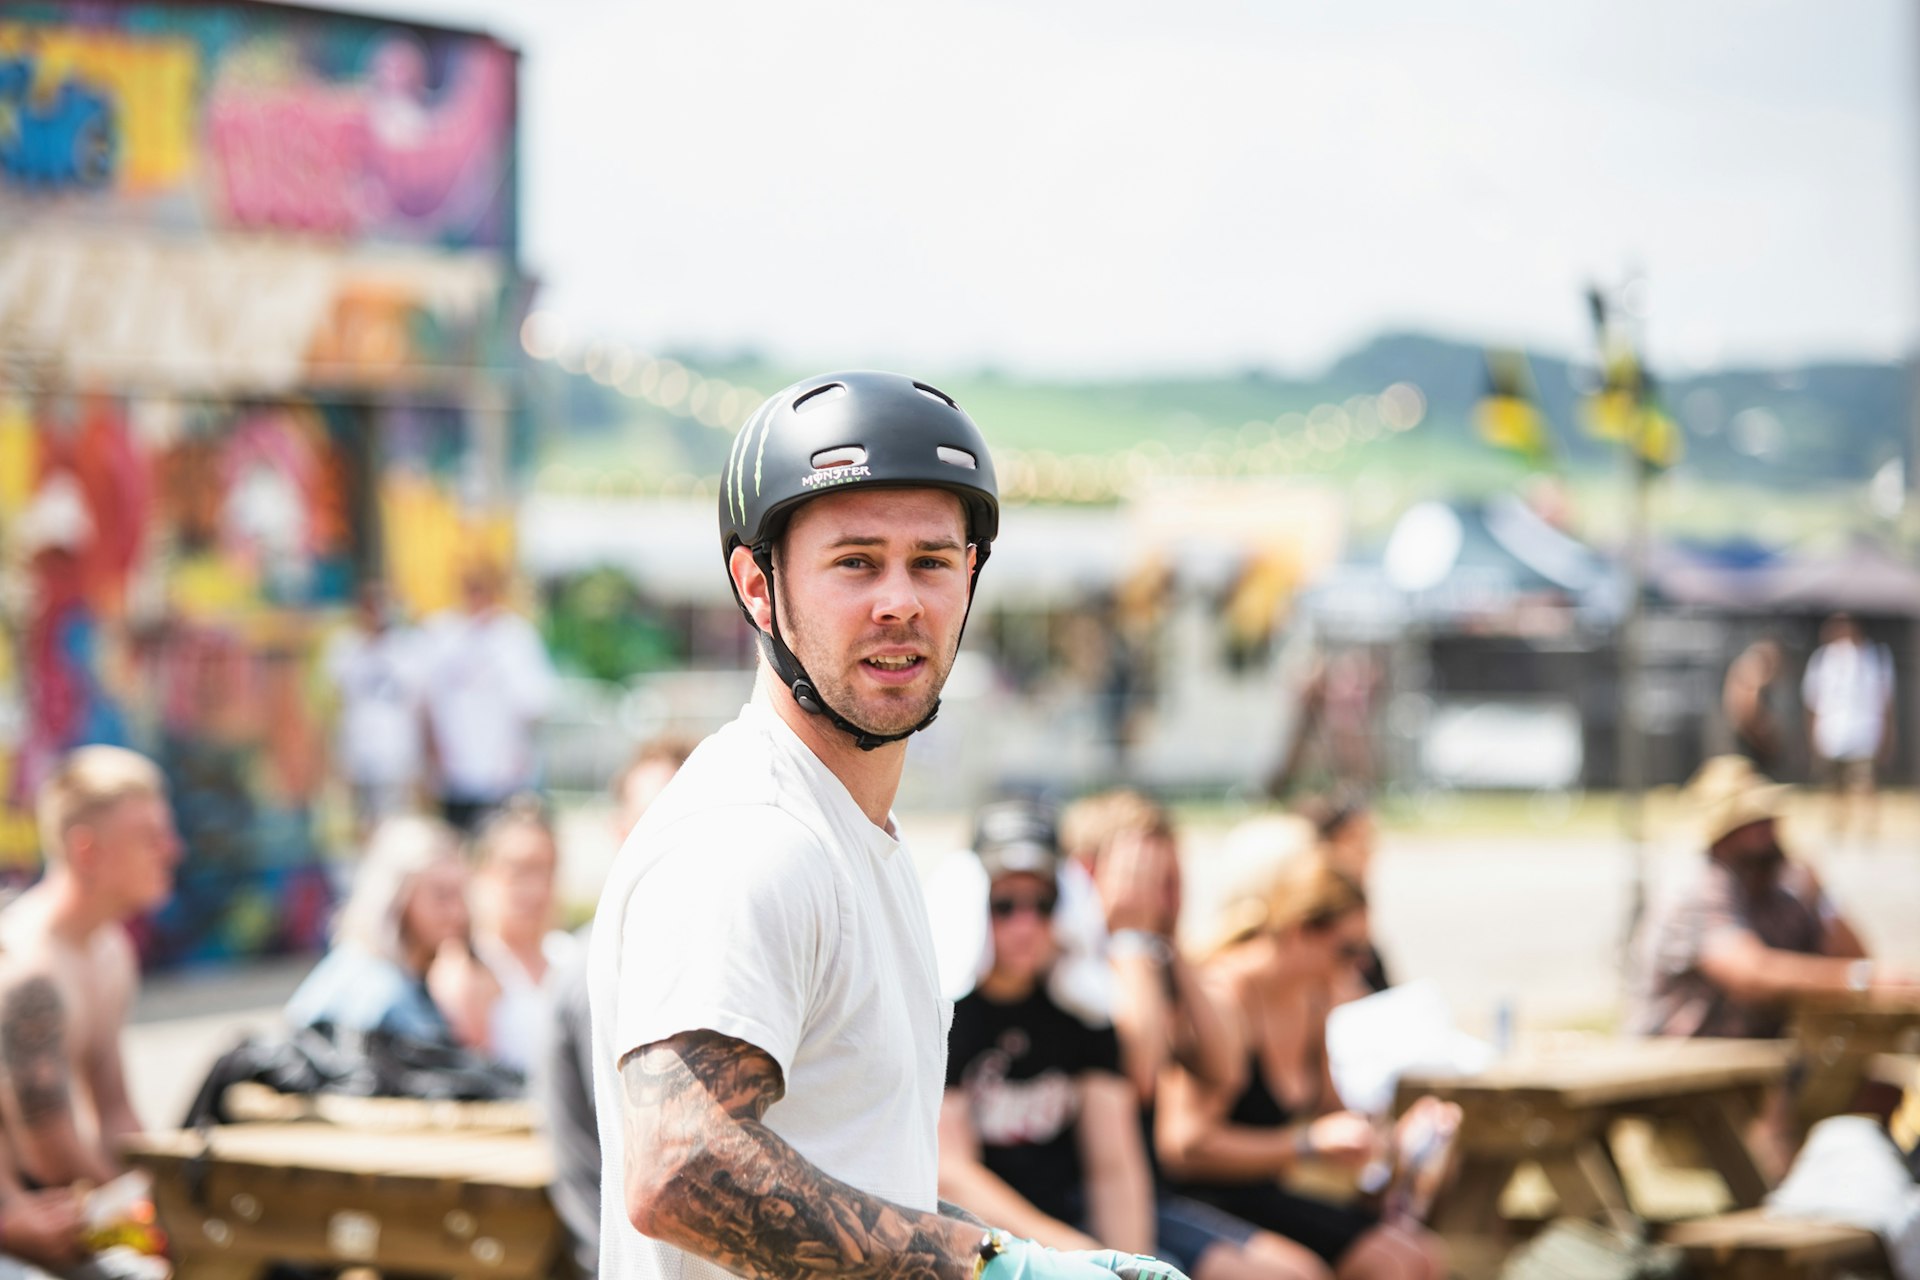 BMX Freestyler Alex Coleborn has his eyes on the prize